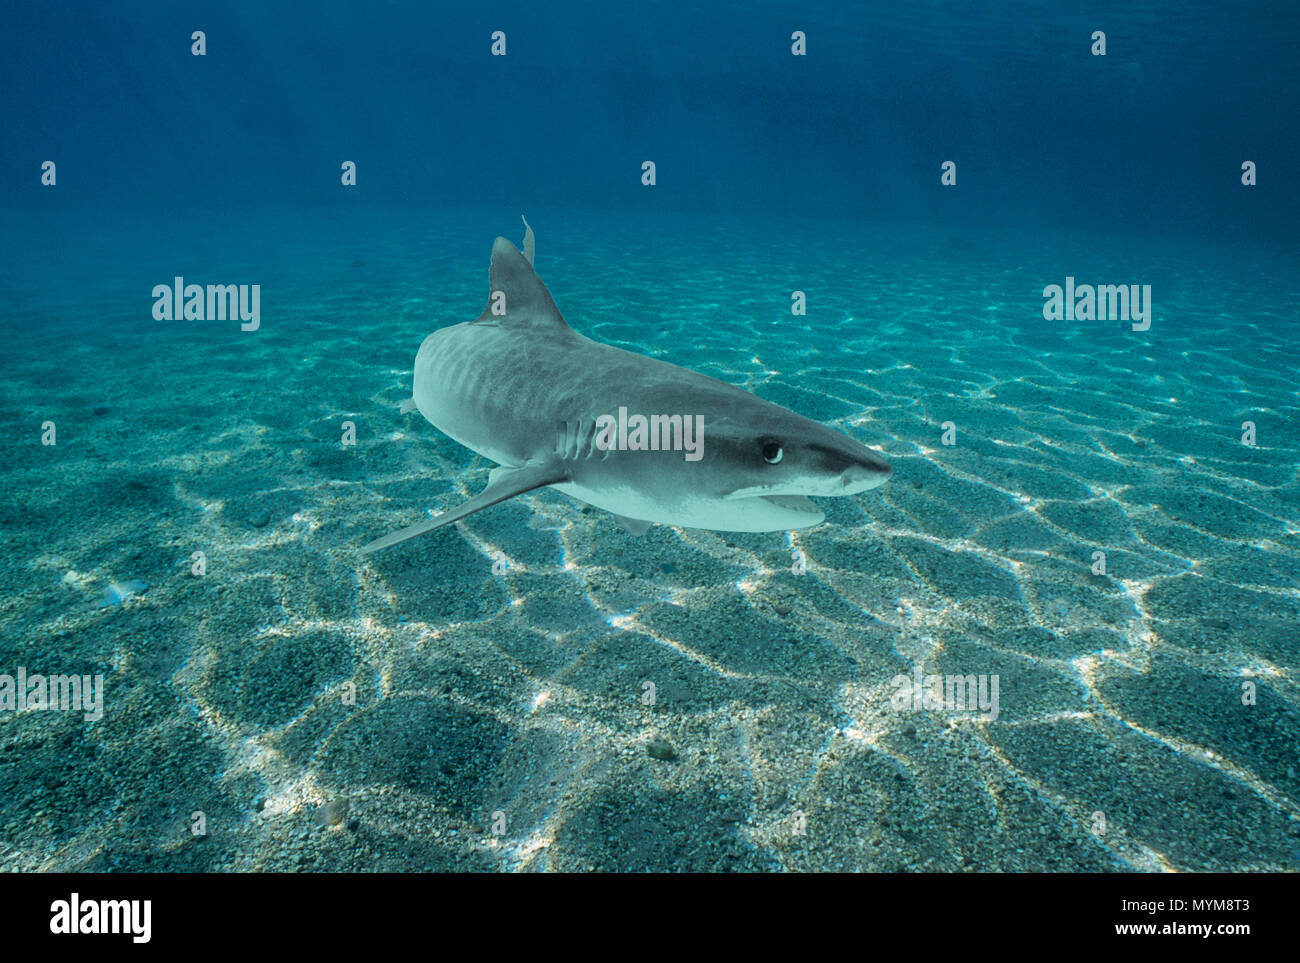 Tiger Shark (Galeocerdo cuvier), Egypt - Red Sea.   Image digitally altered to remove distracting or to add more interesting background. The main subj Stock Photo